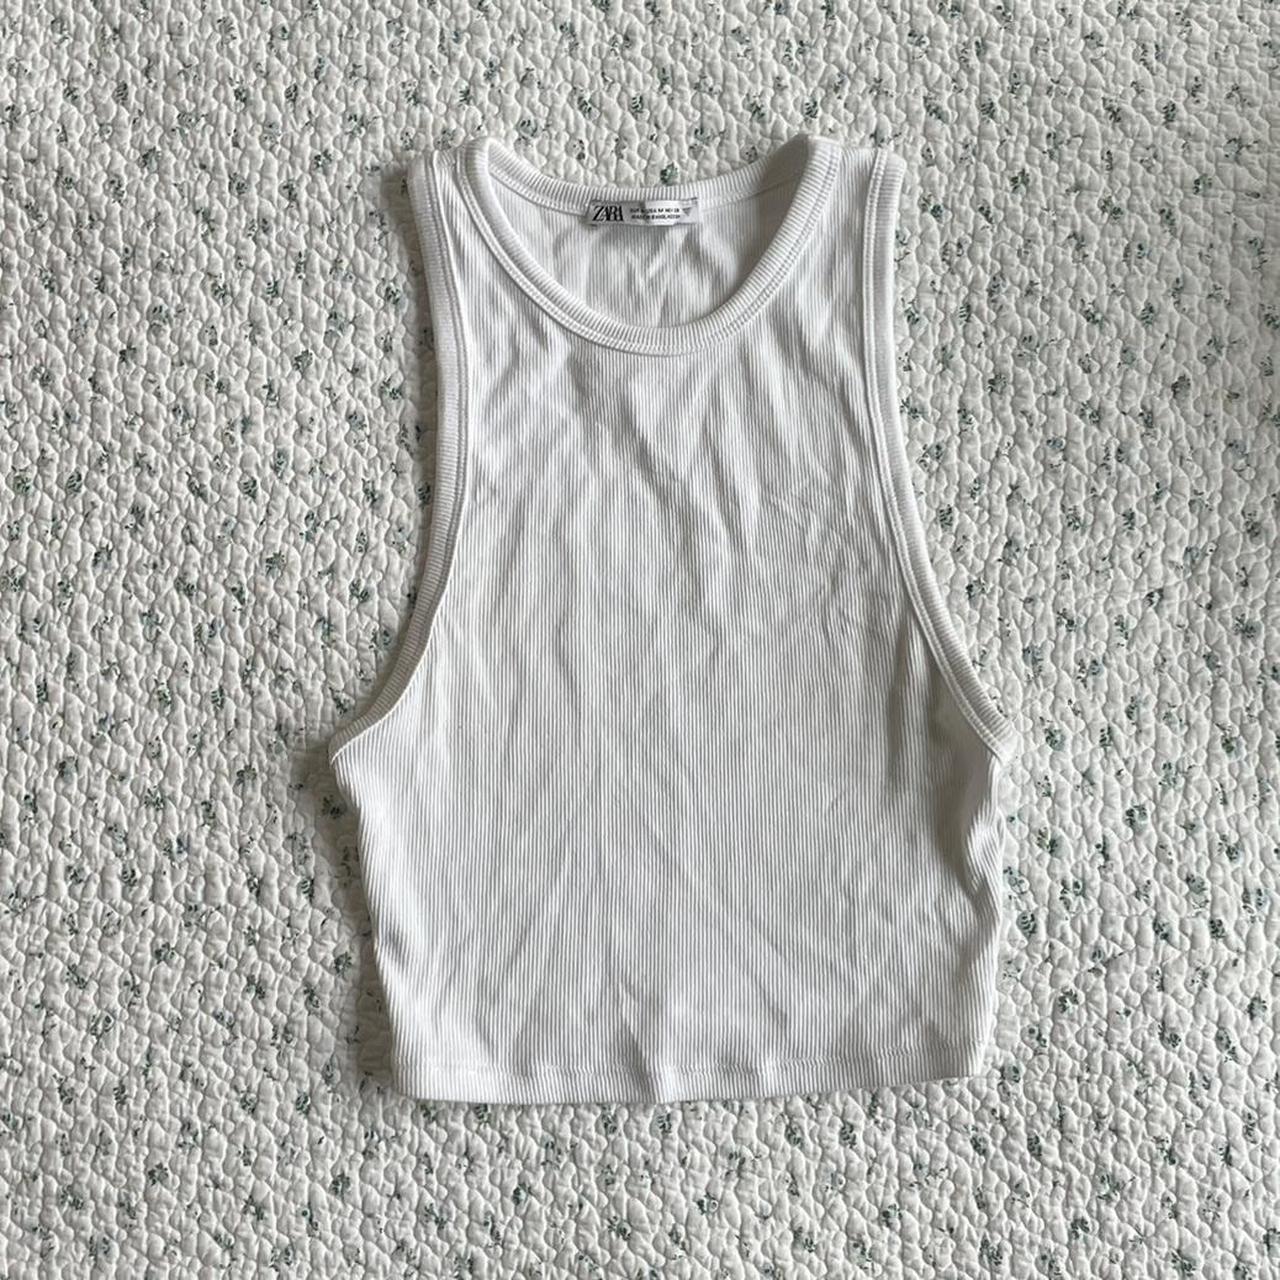 Basic white tank, great with jeans or a simple fit - Depop